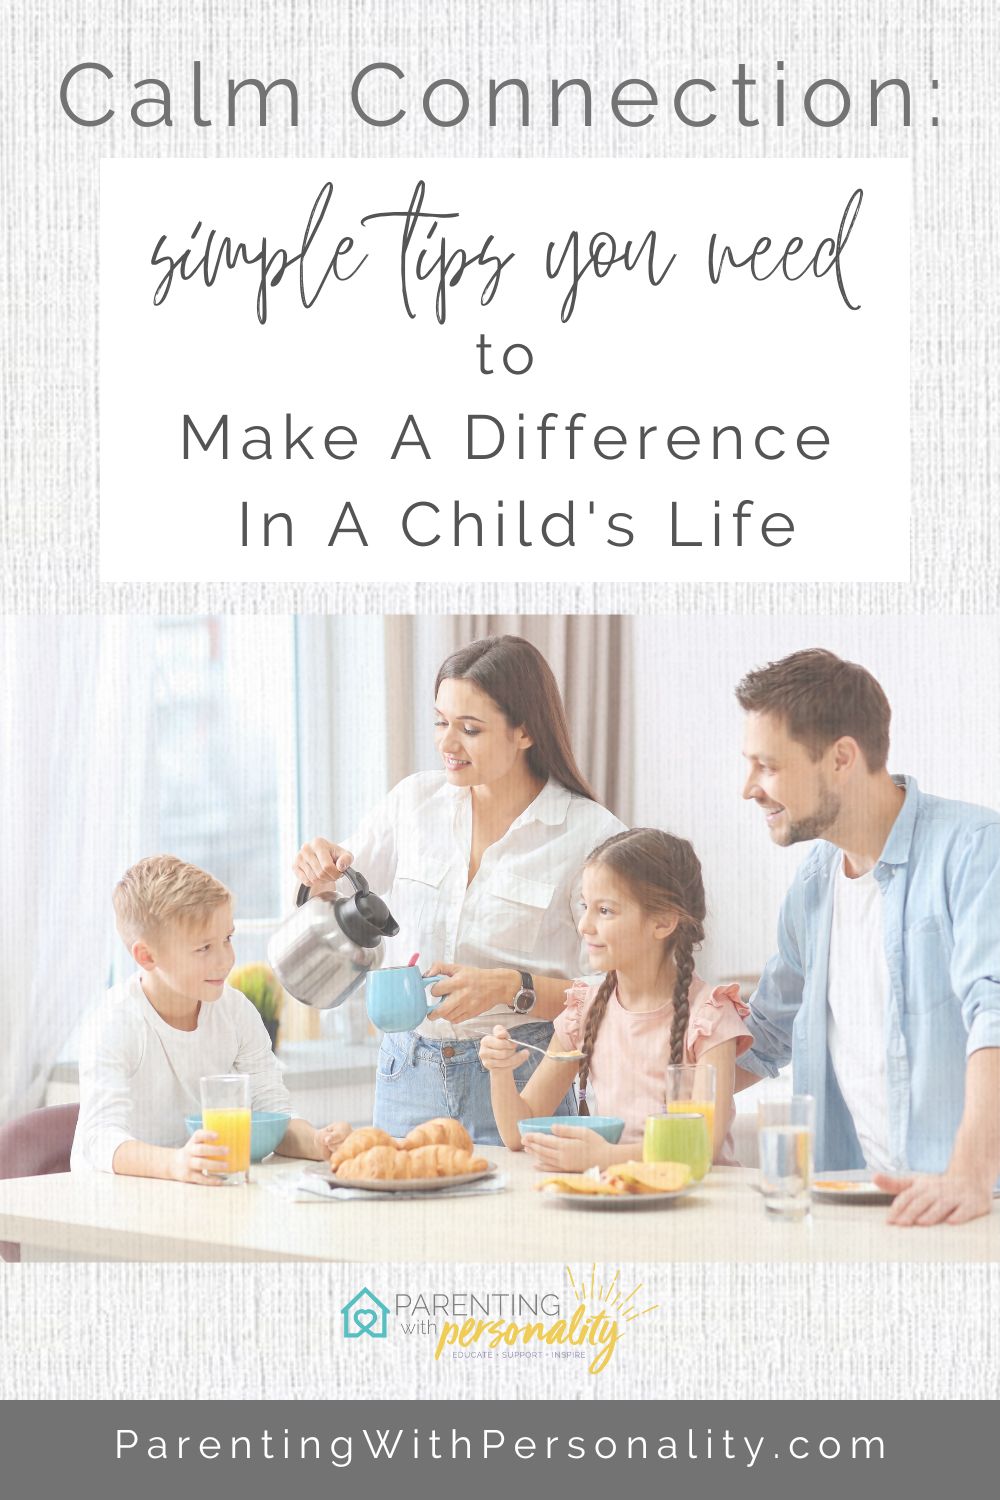 family smiling and interacting while parents make a difference in the life of a child at breakfast